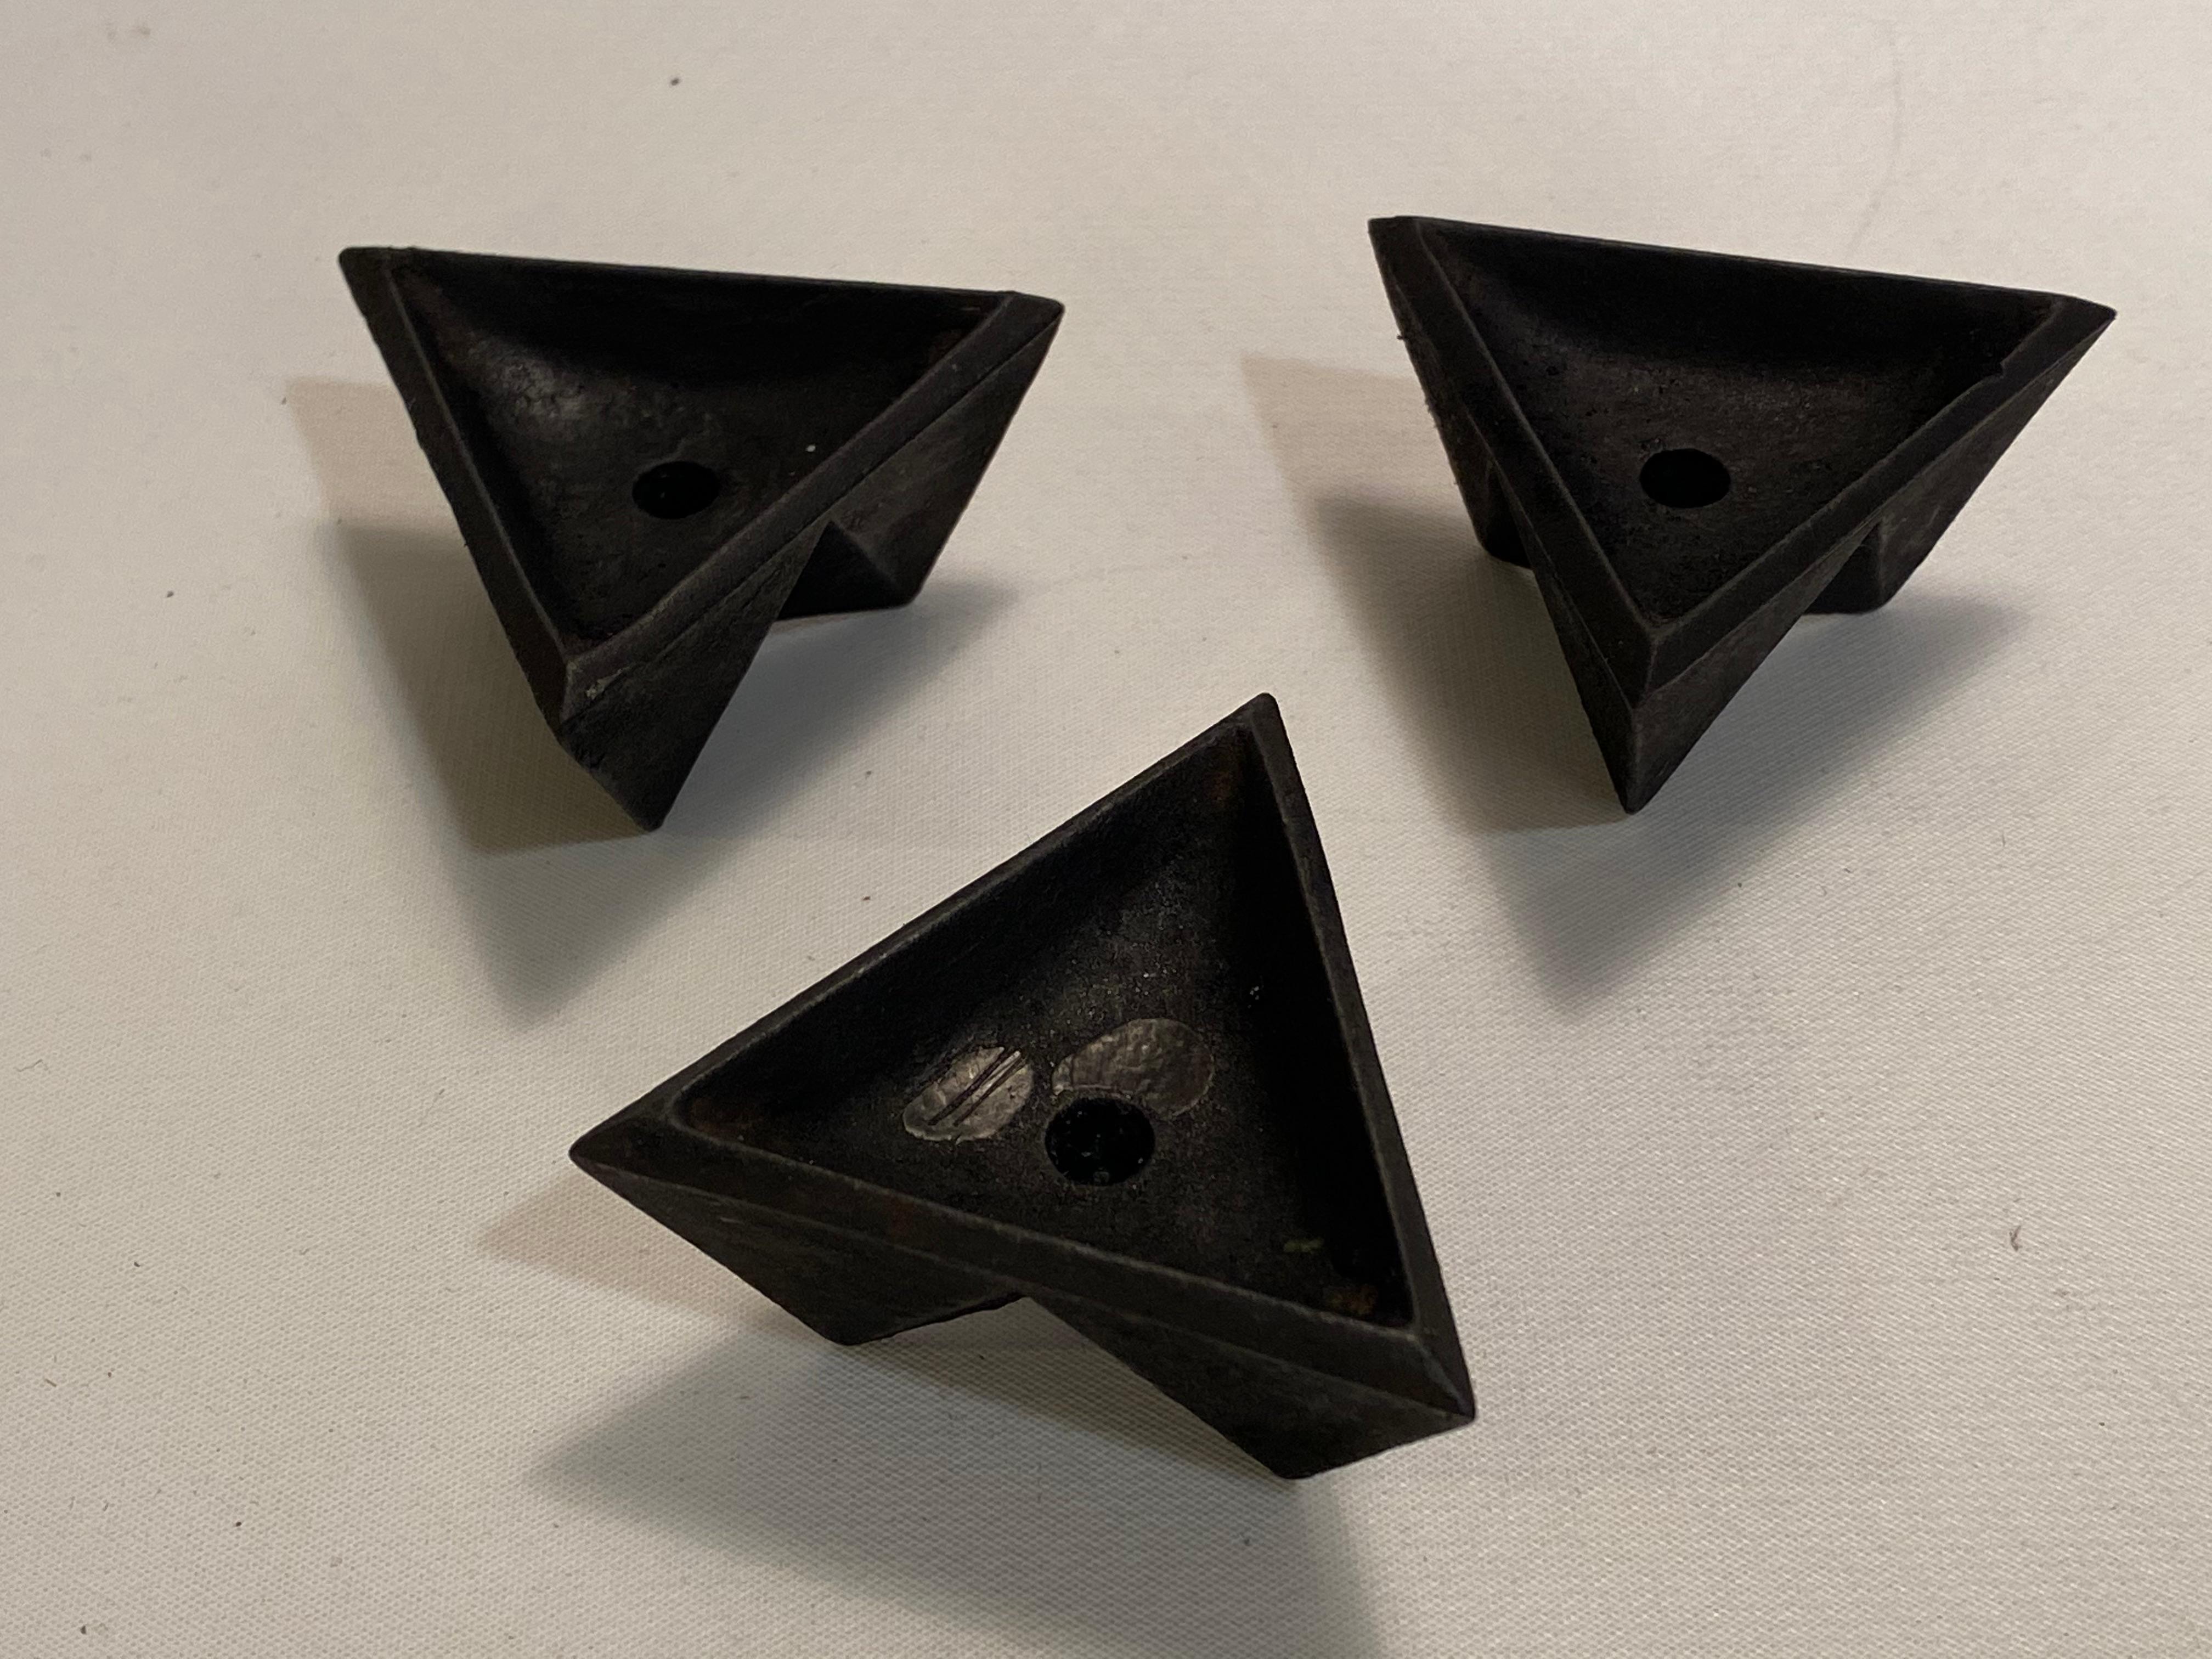 A set of three cast iron origami style candle holders. Geometric pattern that resembles the ancient art of folded paper creations. The holders take the very delicate Danish style taper candle and create a wonderful dramatic candle light grouping.